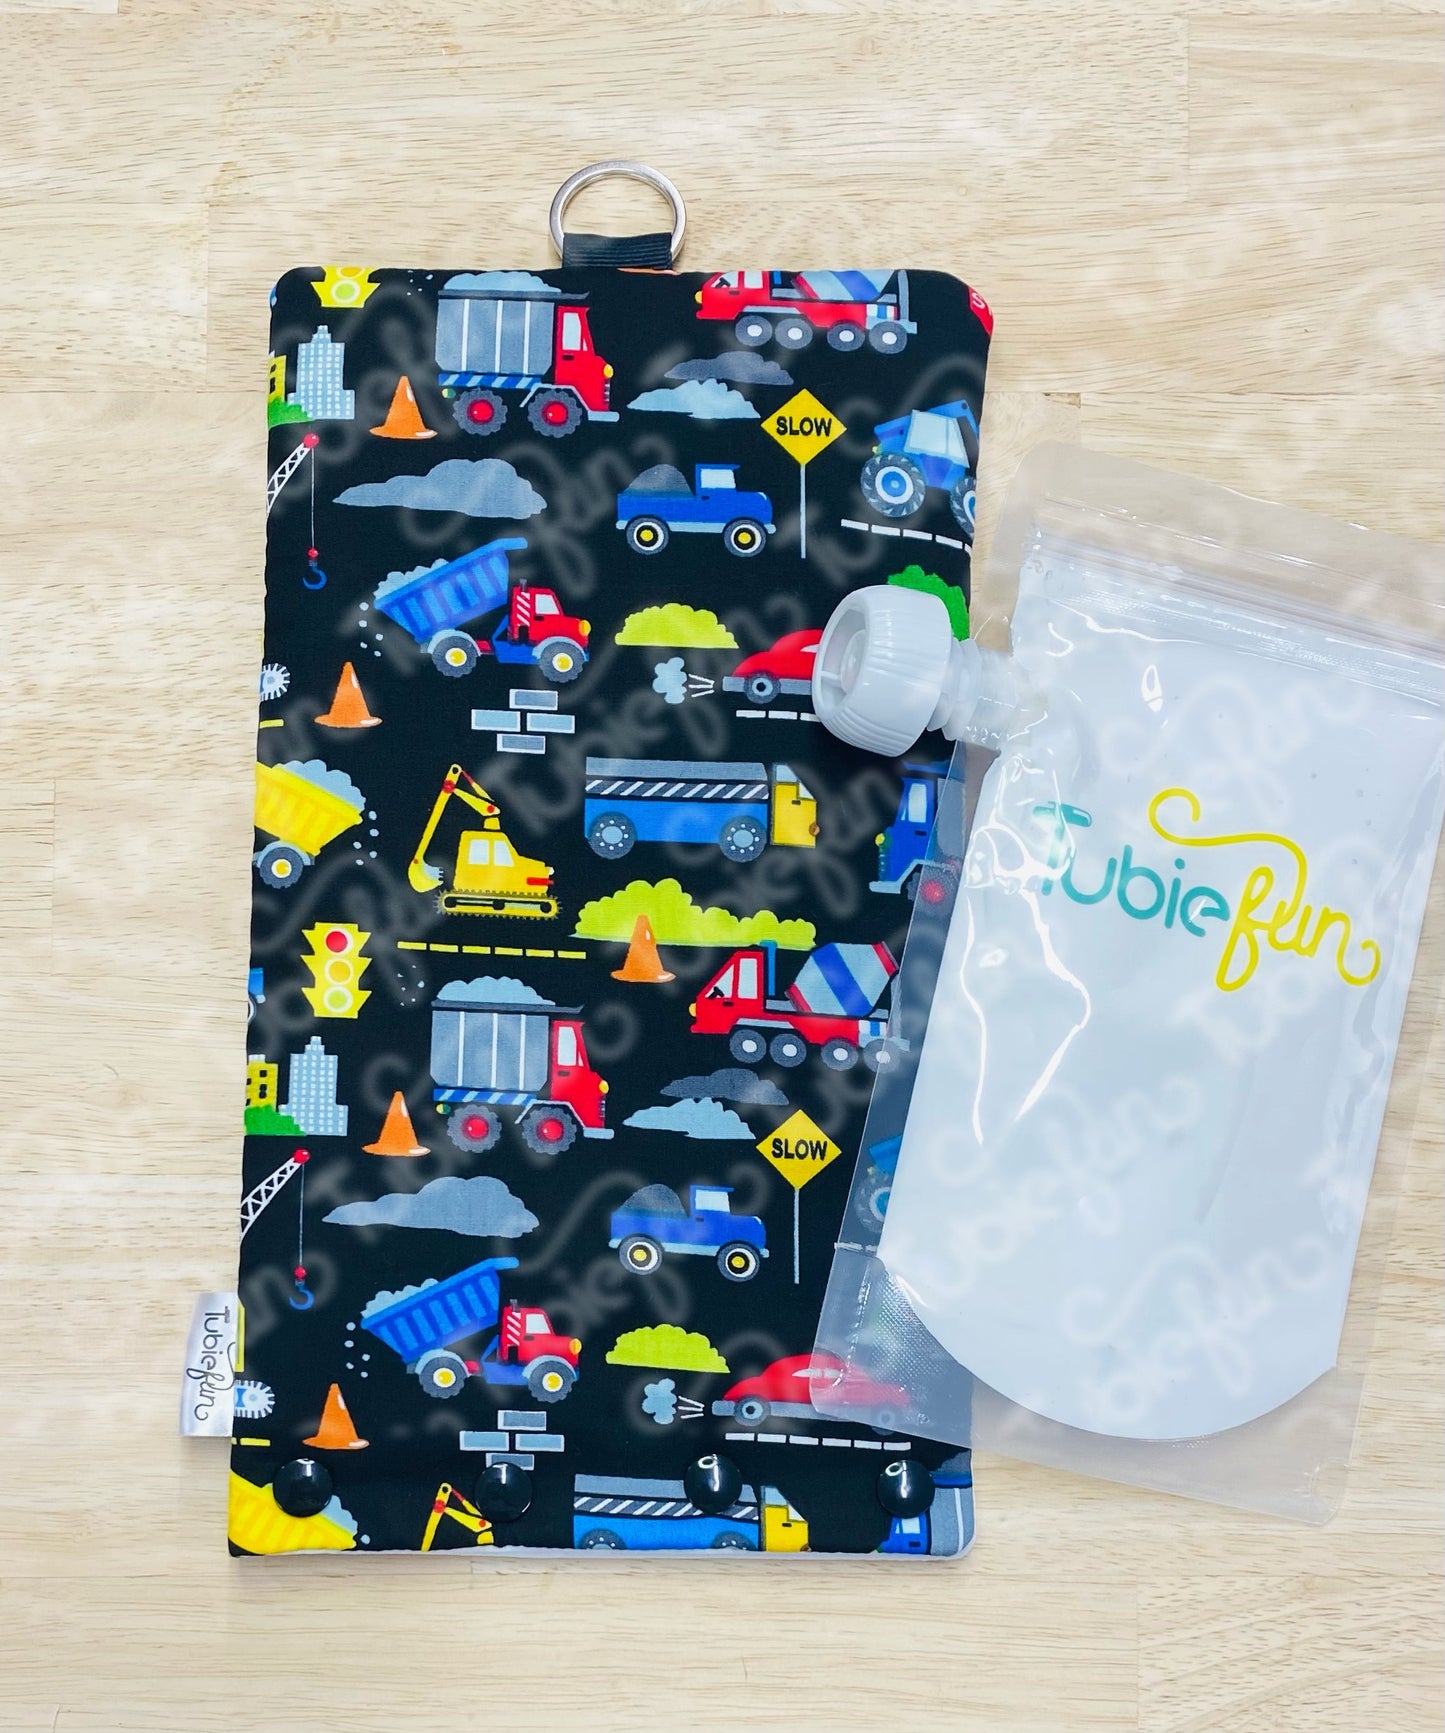 NEW Insulated Milk Bag Suitable for Tubie Fun 500ml Reusable Pouches - Vehicles